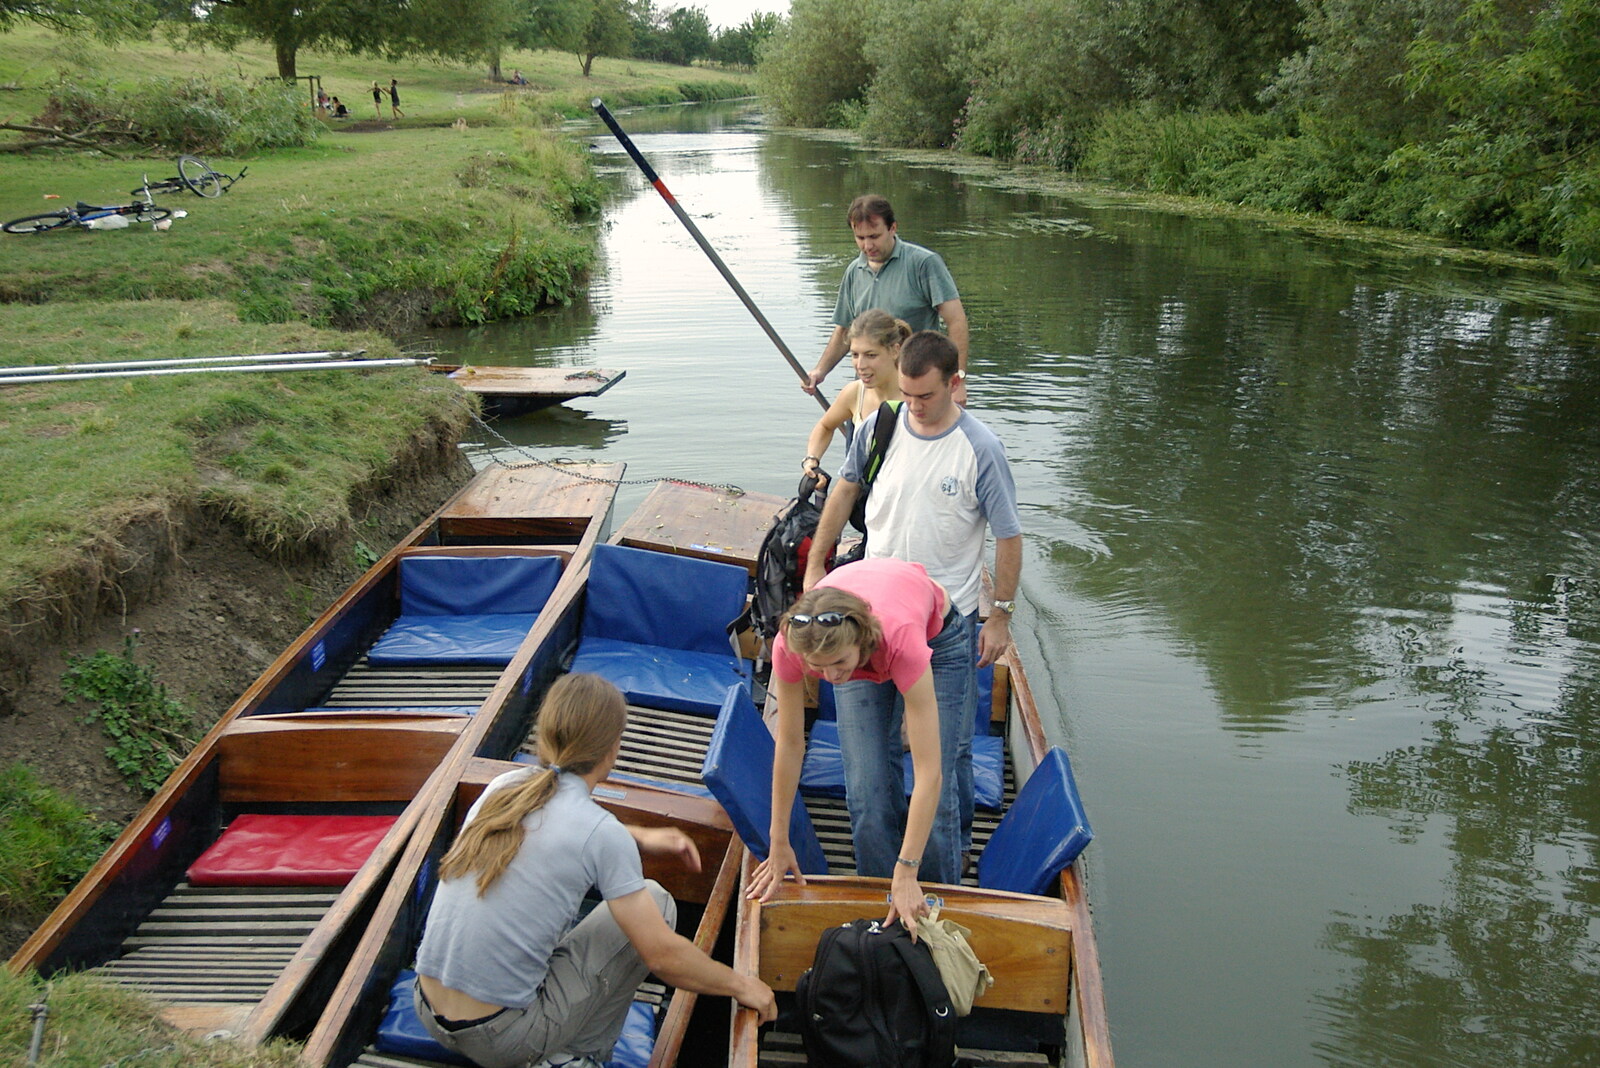 Liviu's punts arrives and moors up from Qualcomm goes Punting on the Cam, Grantchester Meadows, Cambridge - 18th August 2005